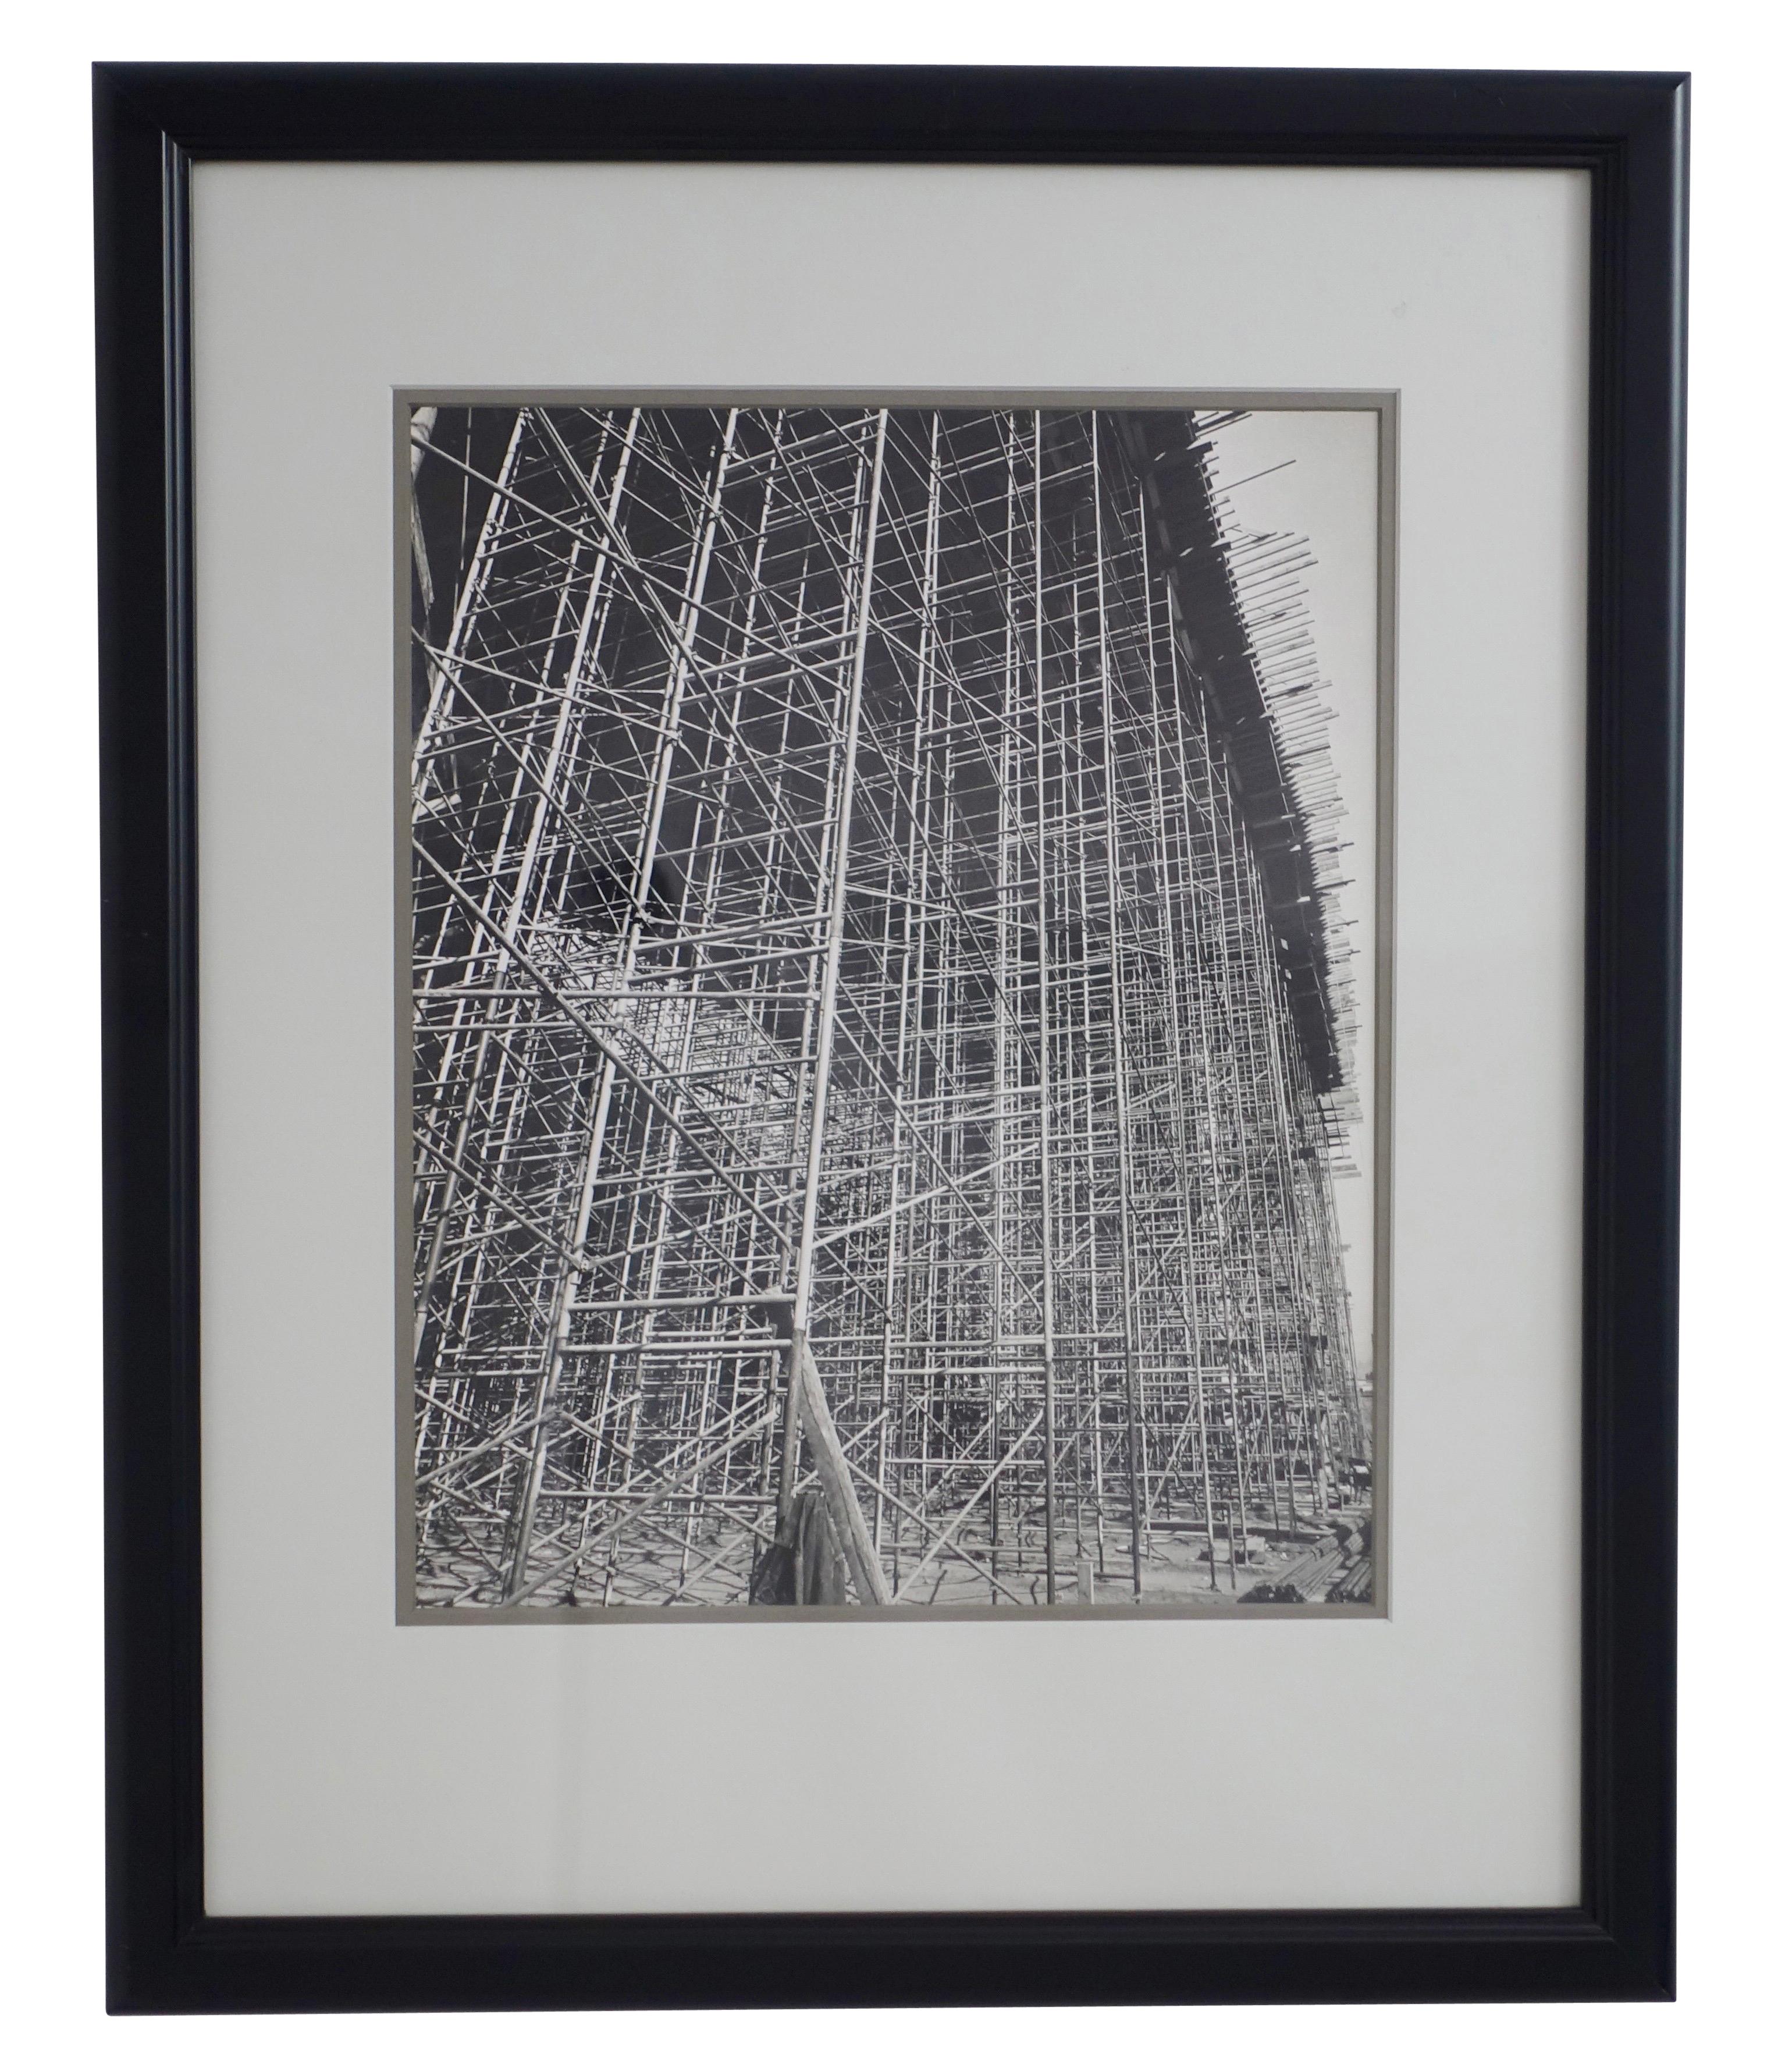 One of a kind, never published, black and white photo of Industrial architectural construction site scaffolding, unsigned. Professionally matted and framed, American, early to mid-20th century.